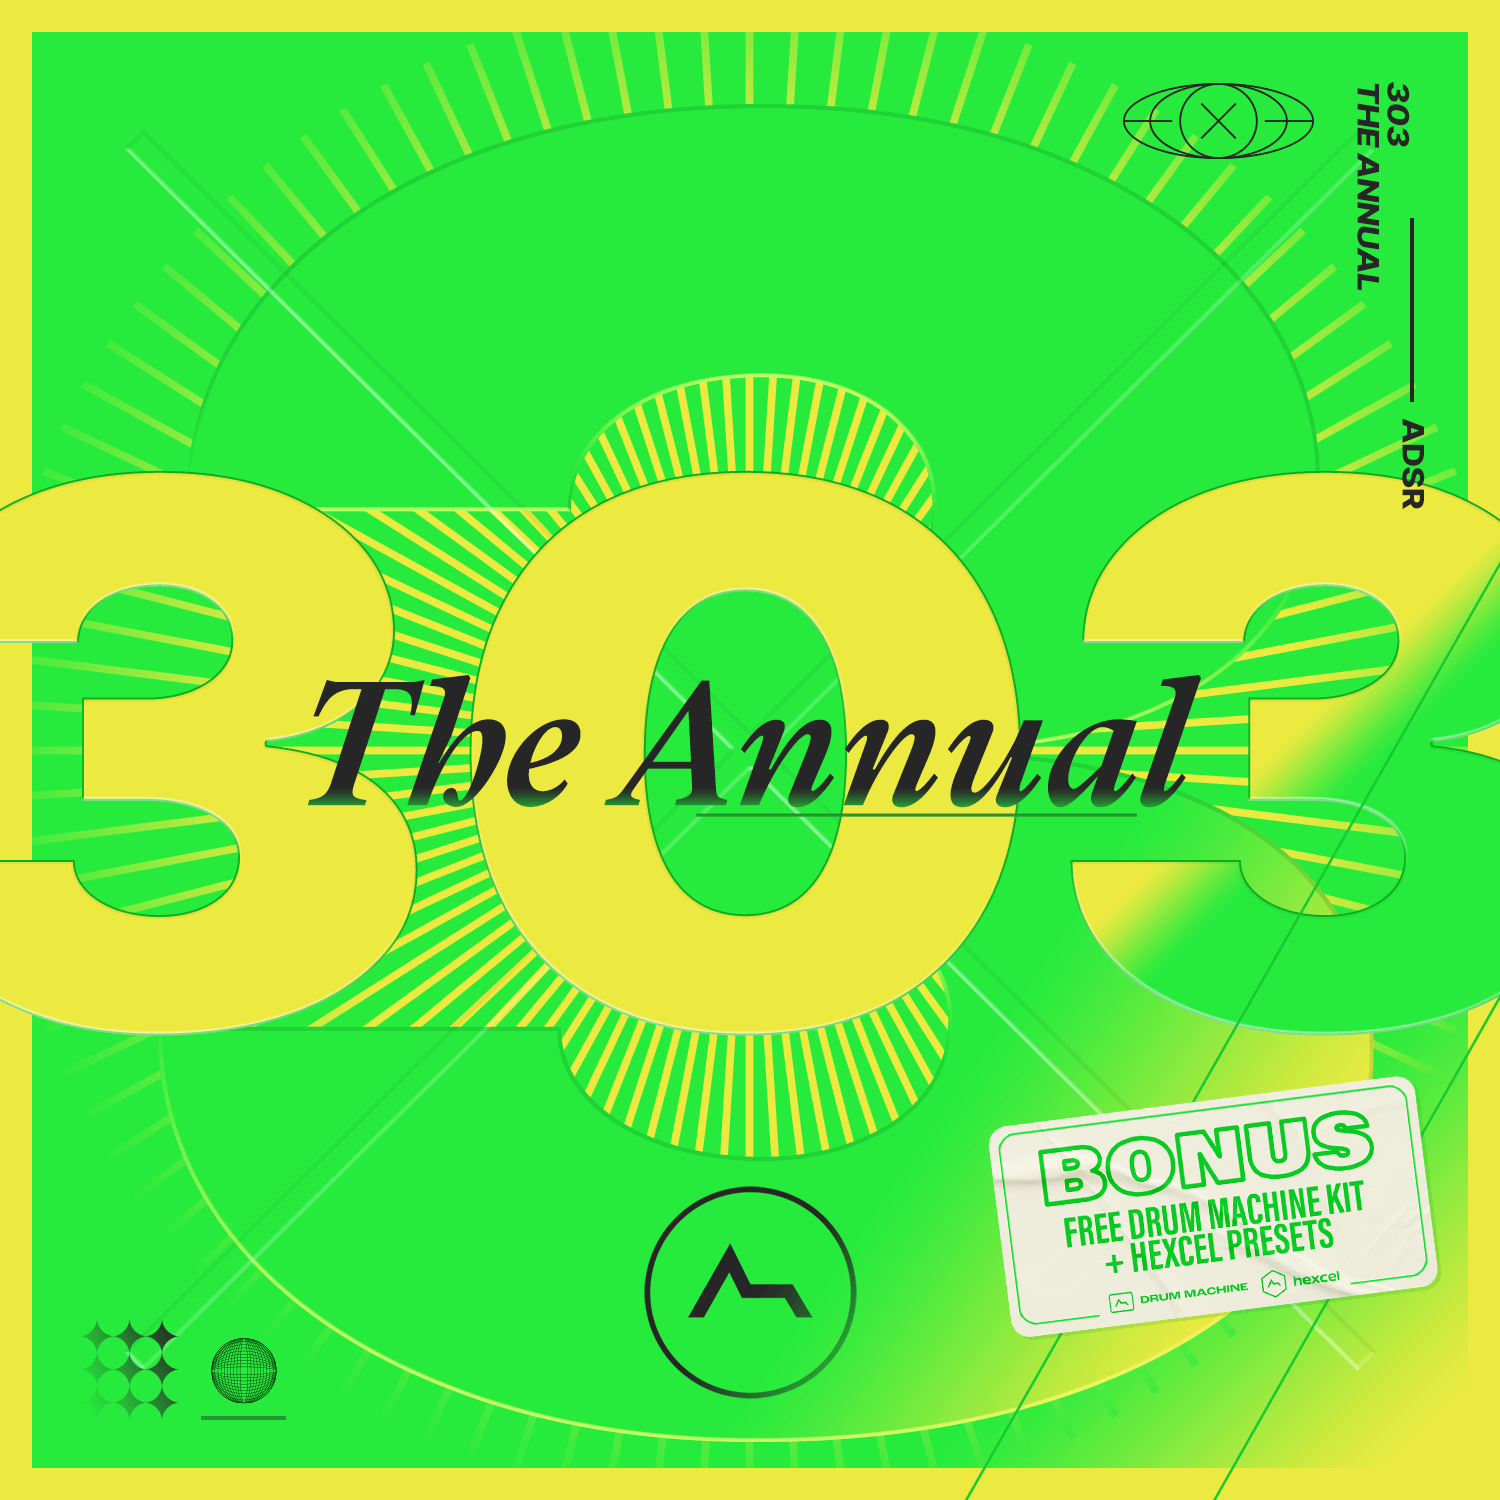 303: The Annual